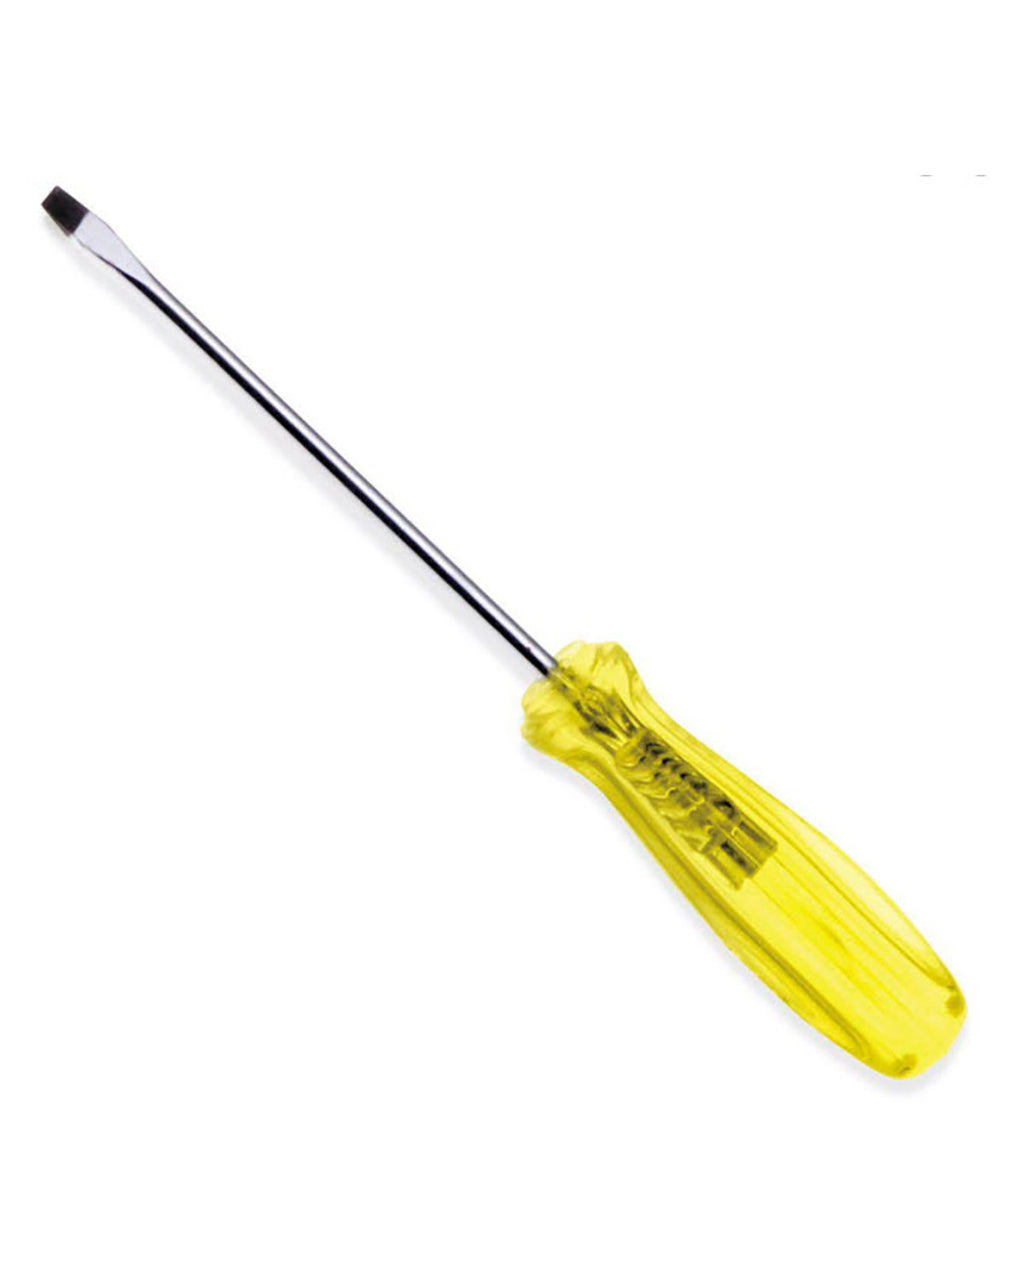 Magnetized Screwdriver